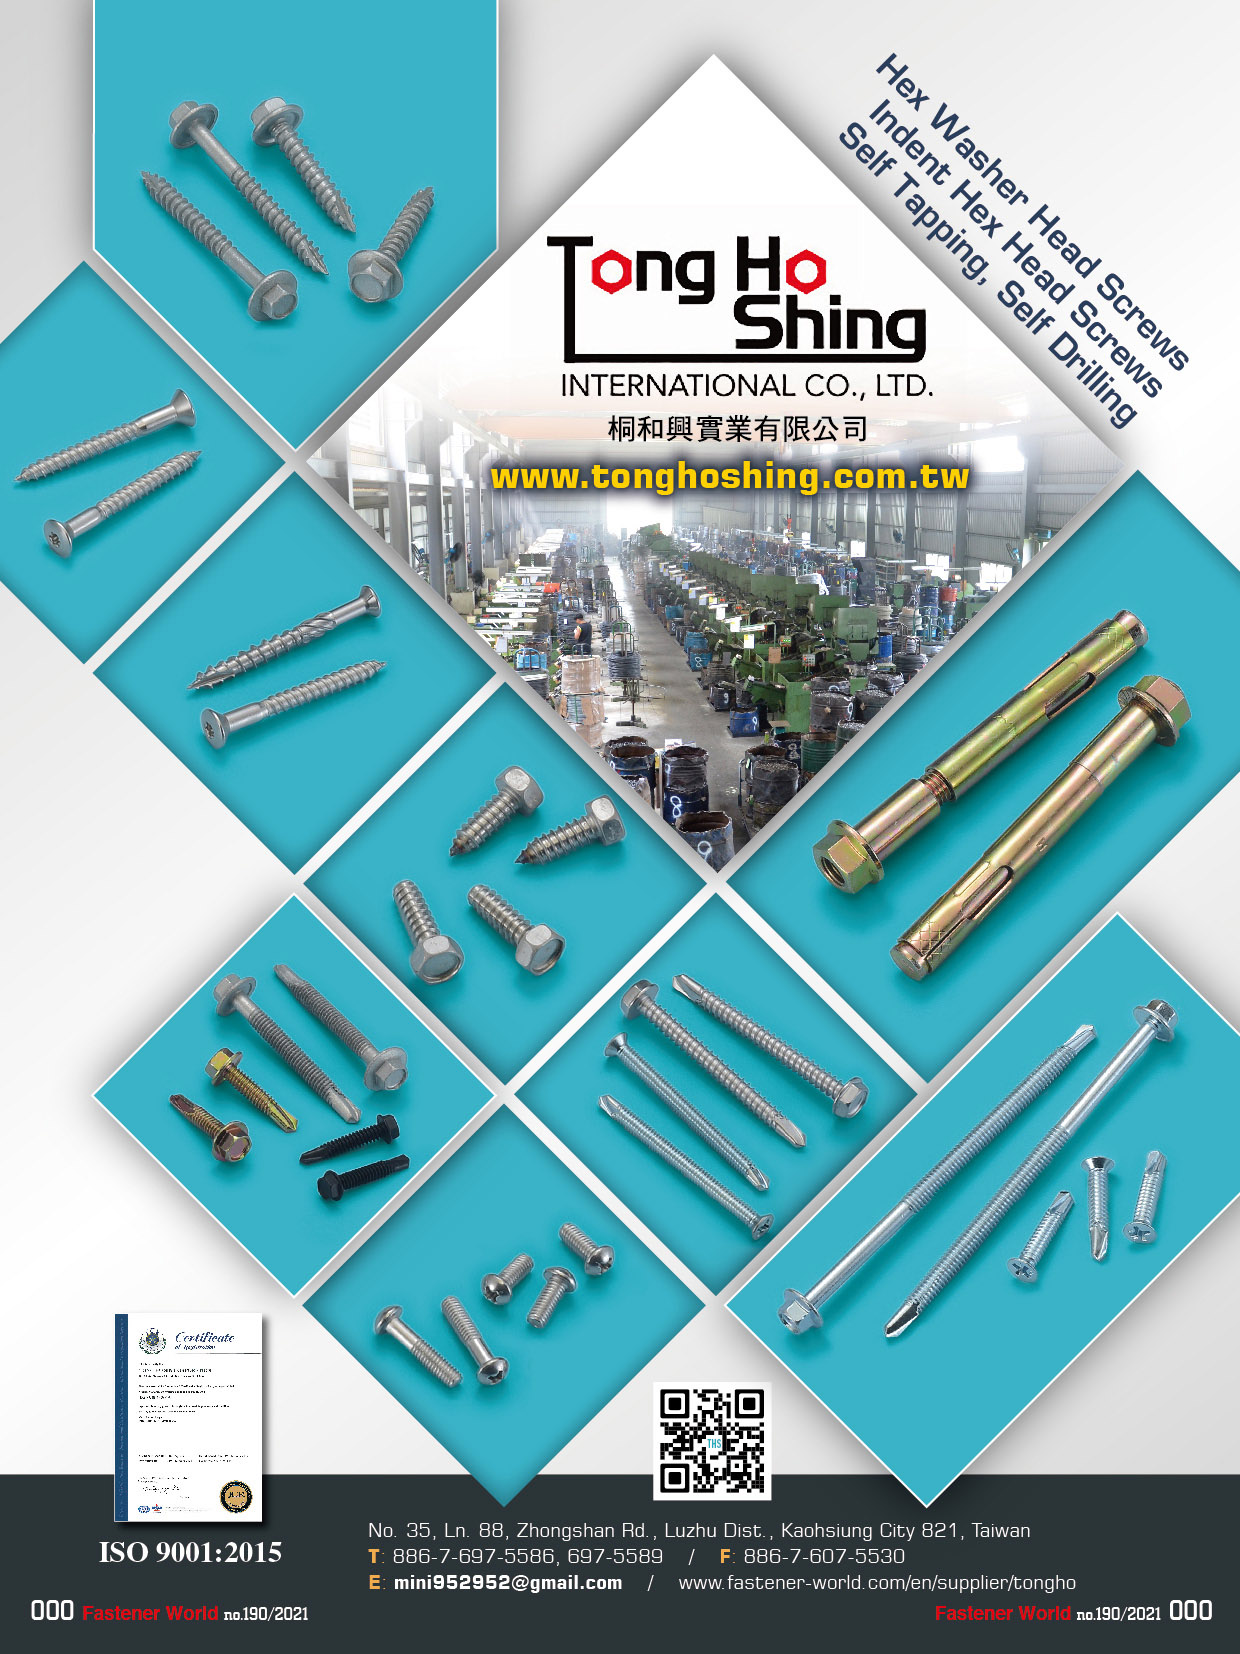 TONG HO SHING INTERNATIONAL CO., LTD. , Hex Washer Head Screws, Indent Hex Head Screws, Self Tapping Screws, Self Drilling Screws , Hexagon Washer Head Screws / Bolts